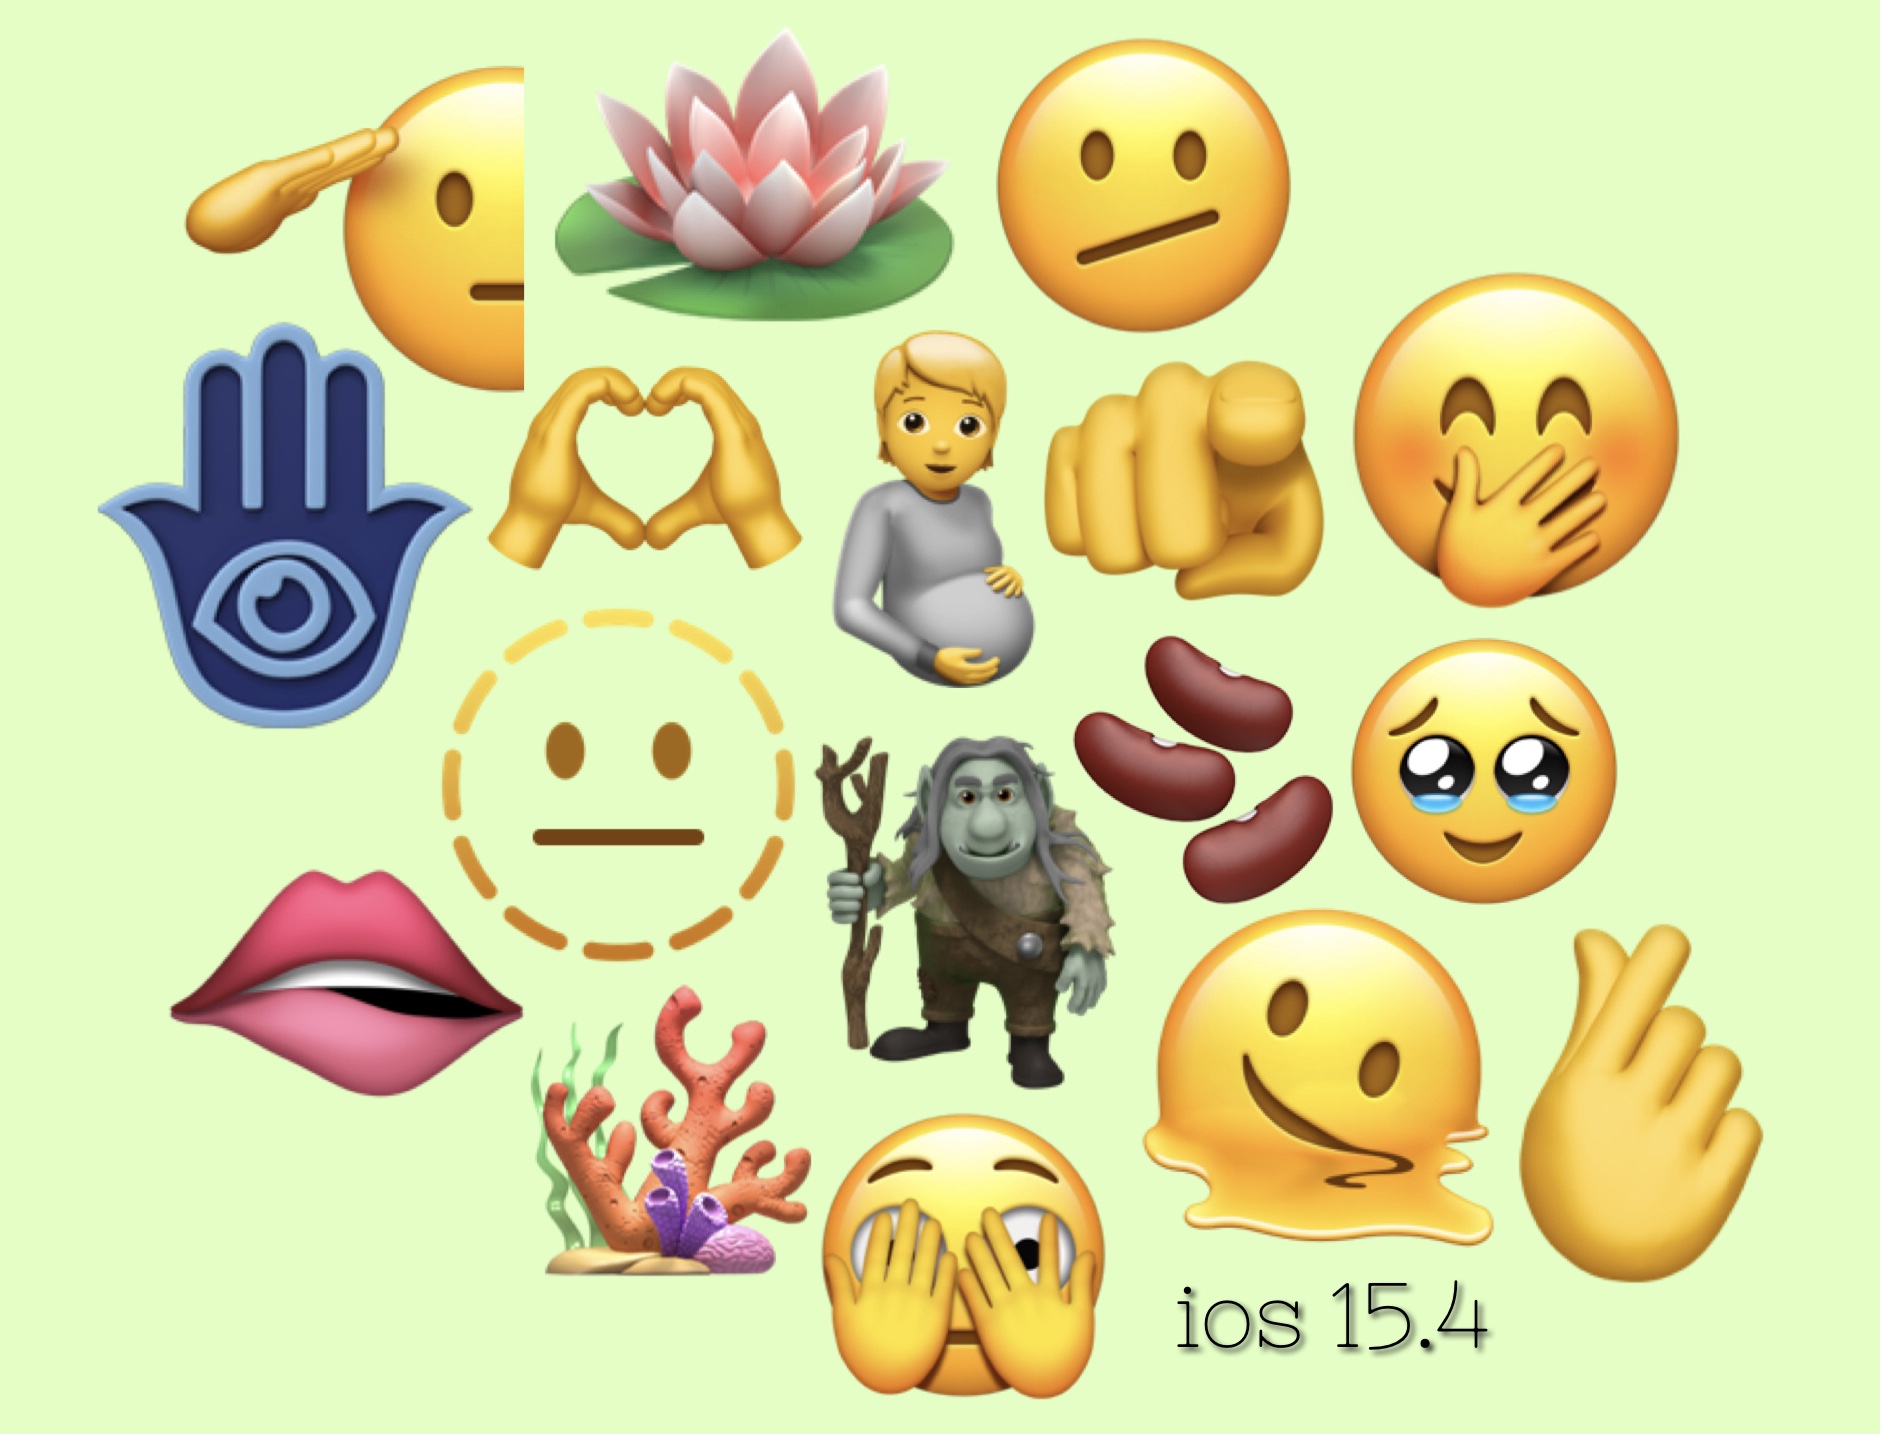 Lose the Cartoon Yellow People Emoji! How to Access Diverse Emoji Icons in  iOS